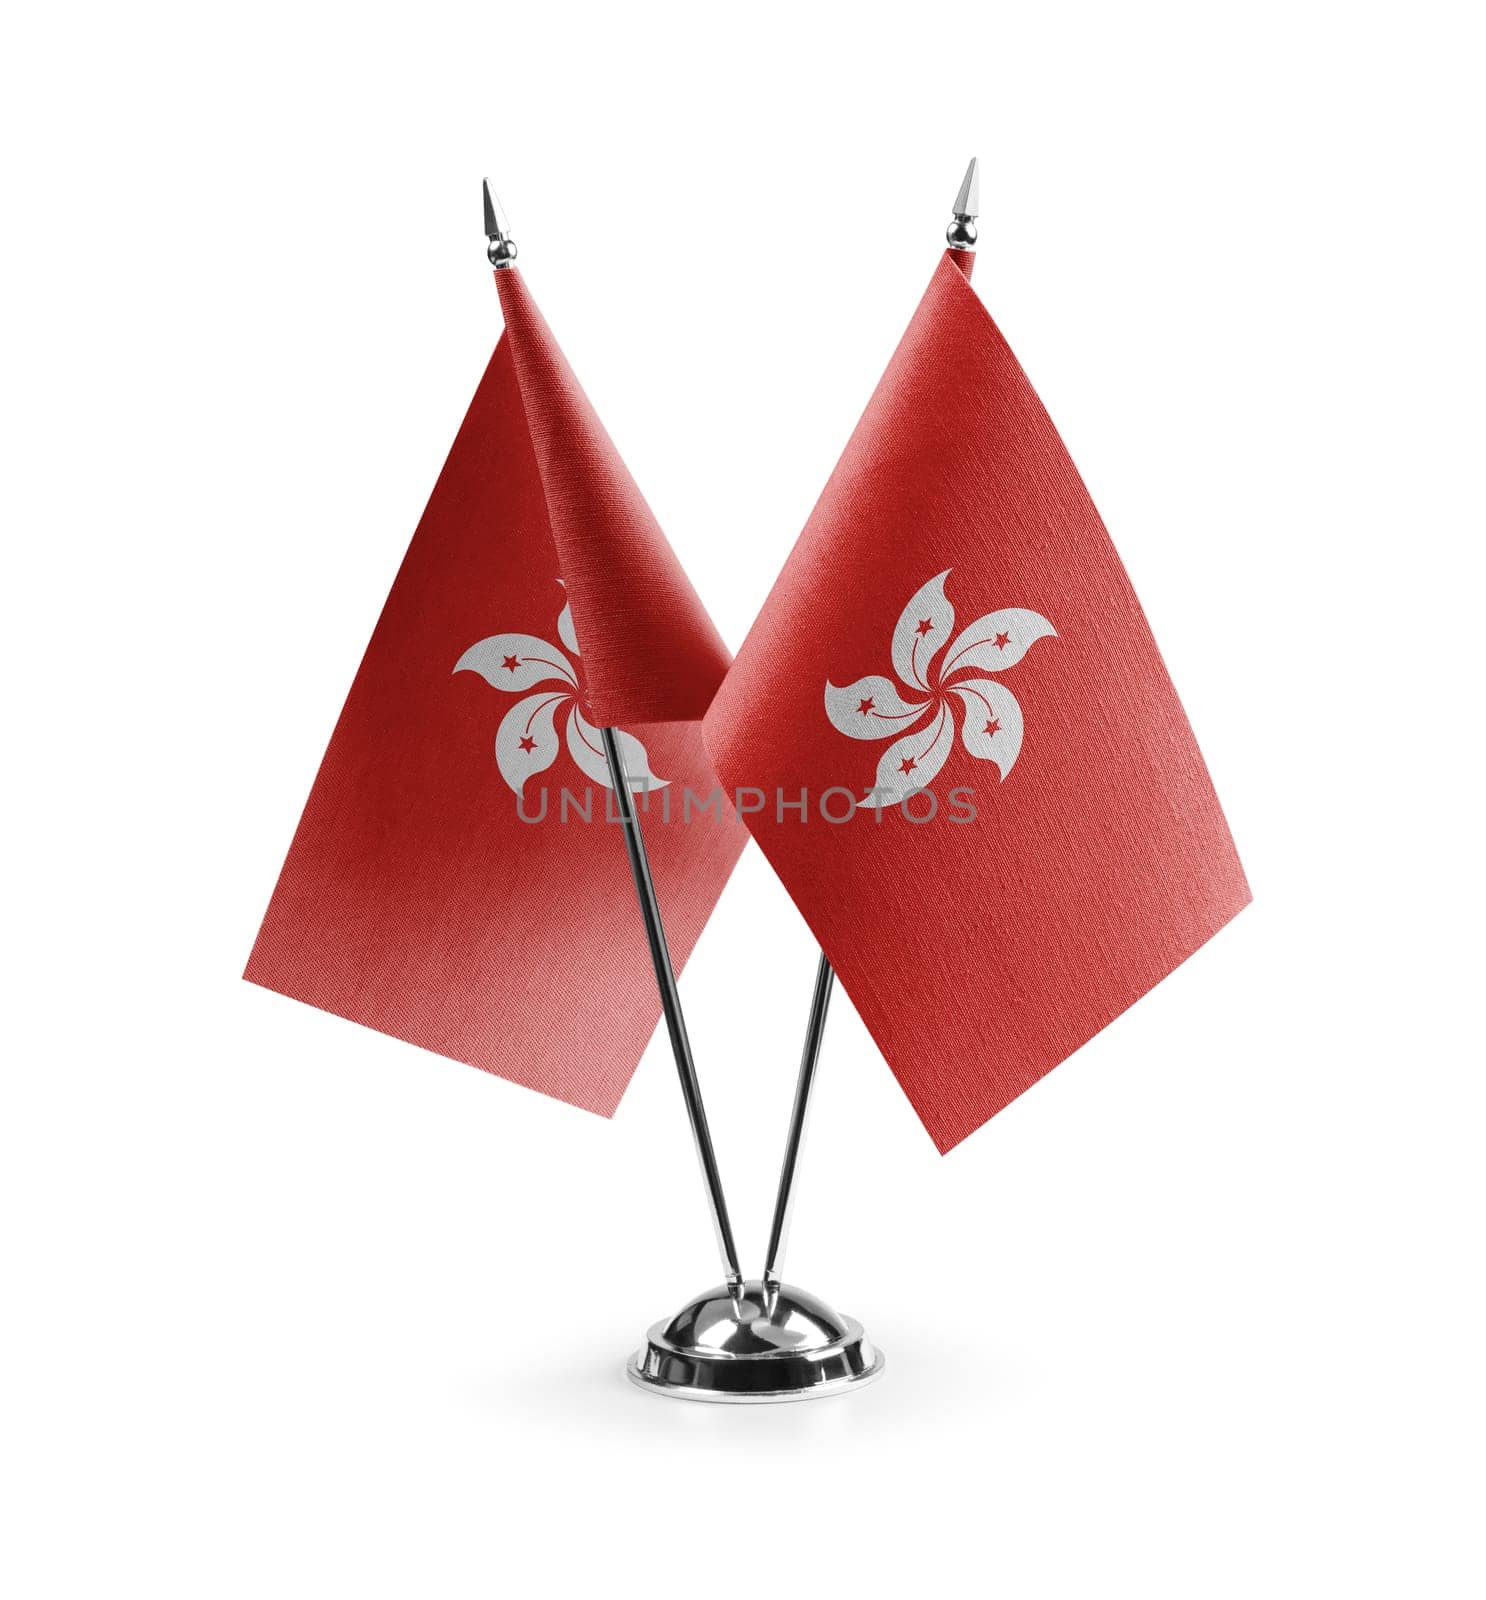 Small national flags of the Hong Kong on a white background.